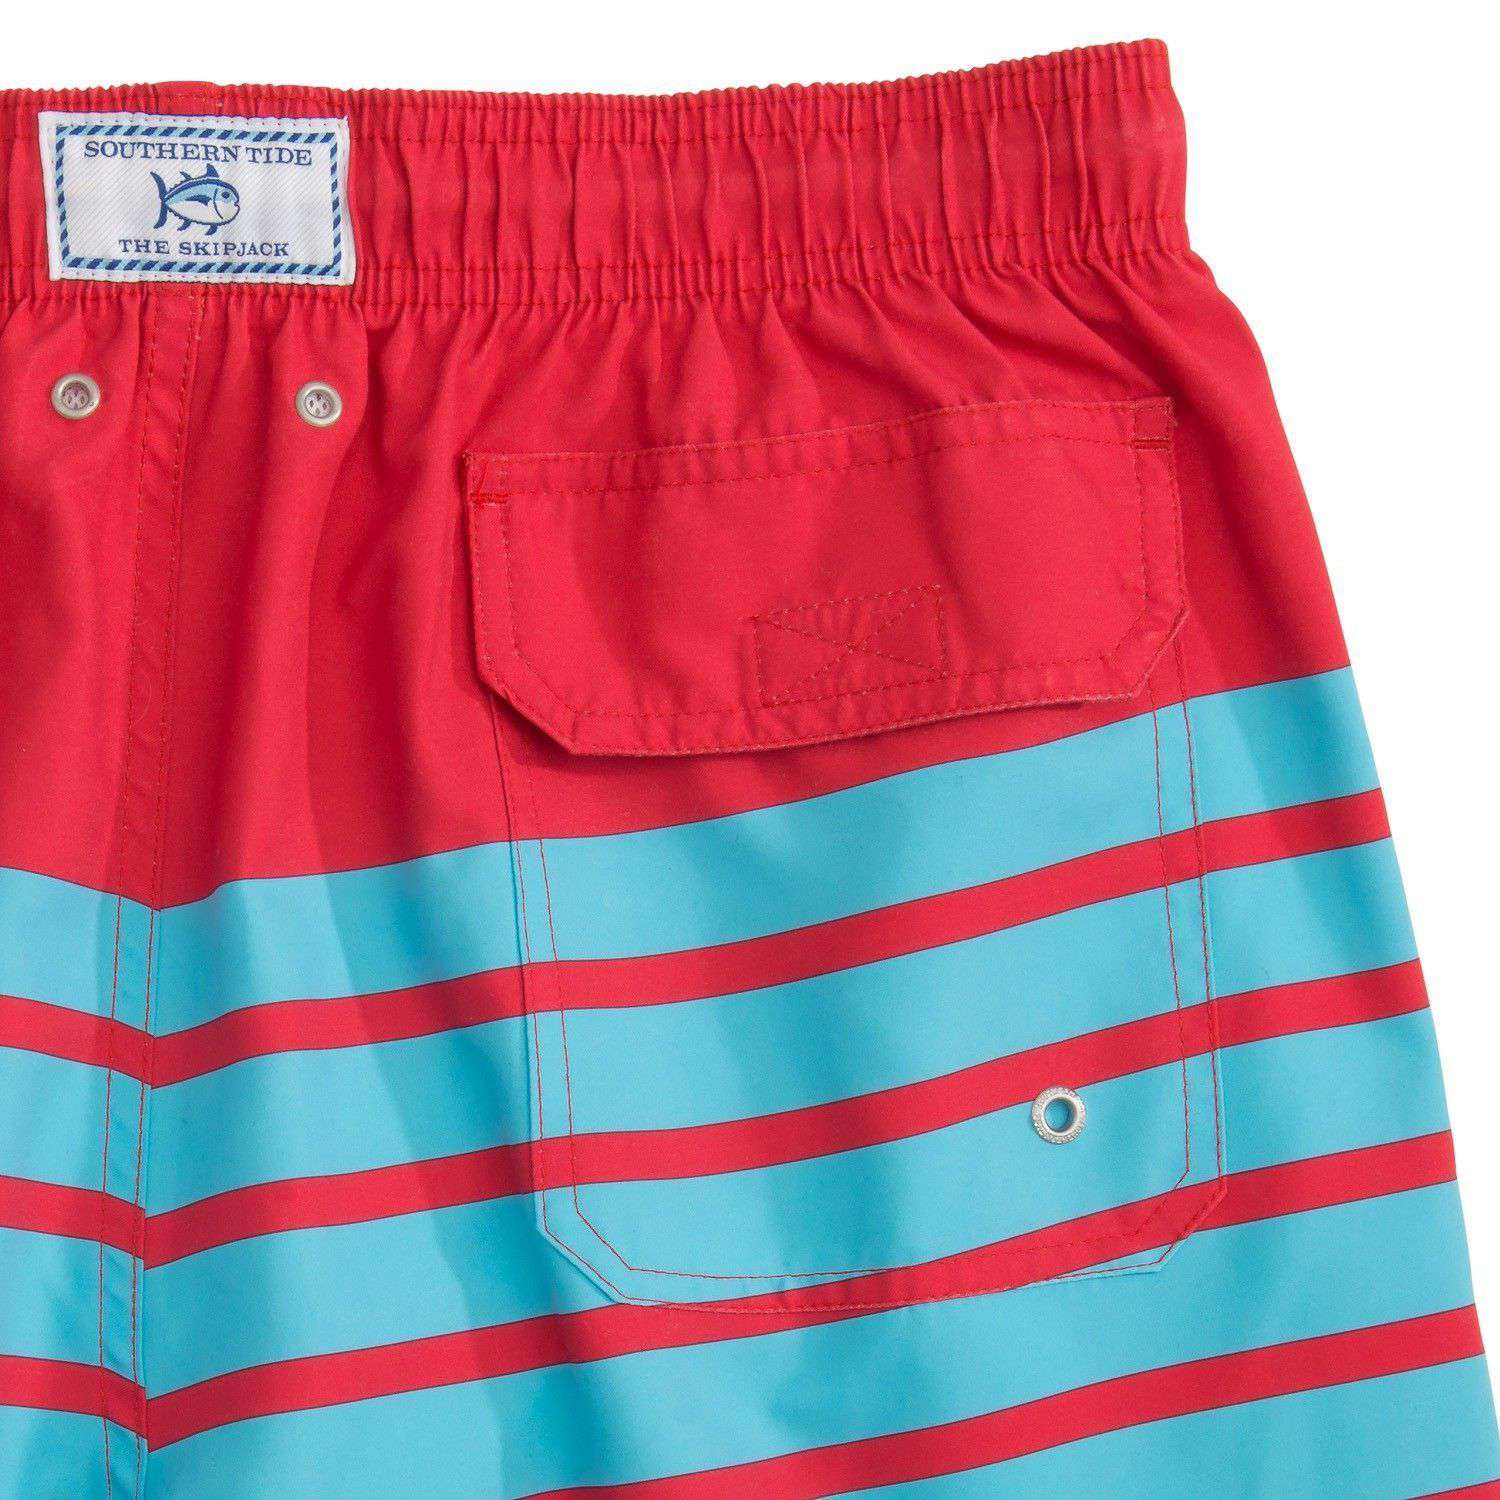 For Shore Stripe Swim Trunks in Channel Marker Red/Turquoise by Southern Tide - Country Club Prep